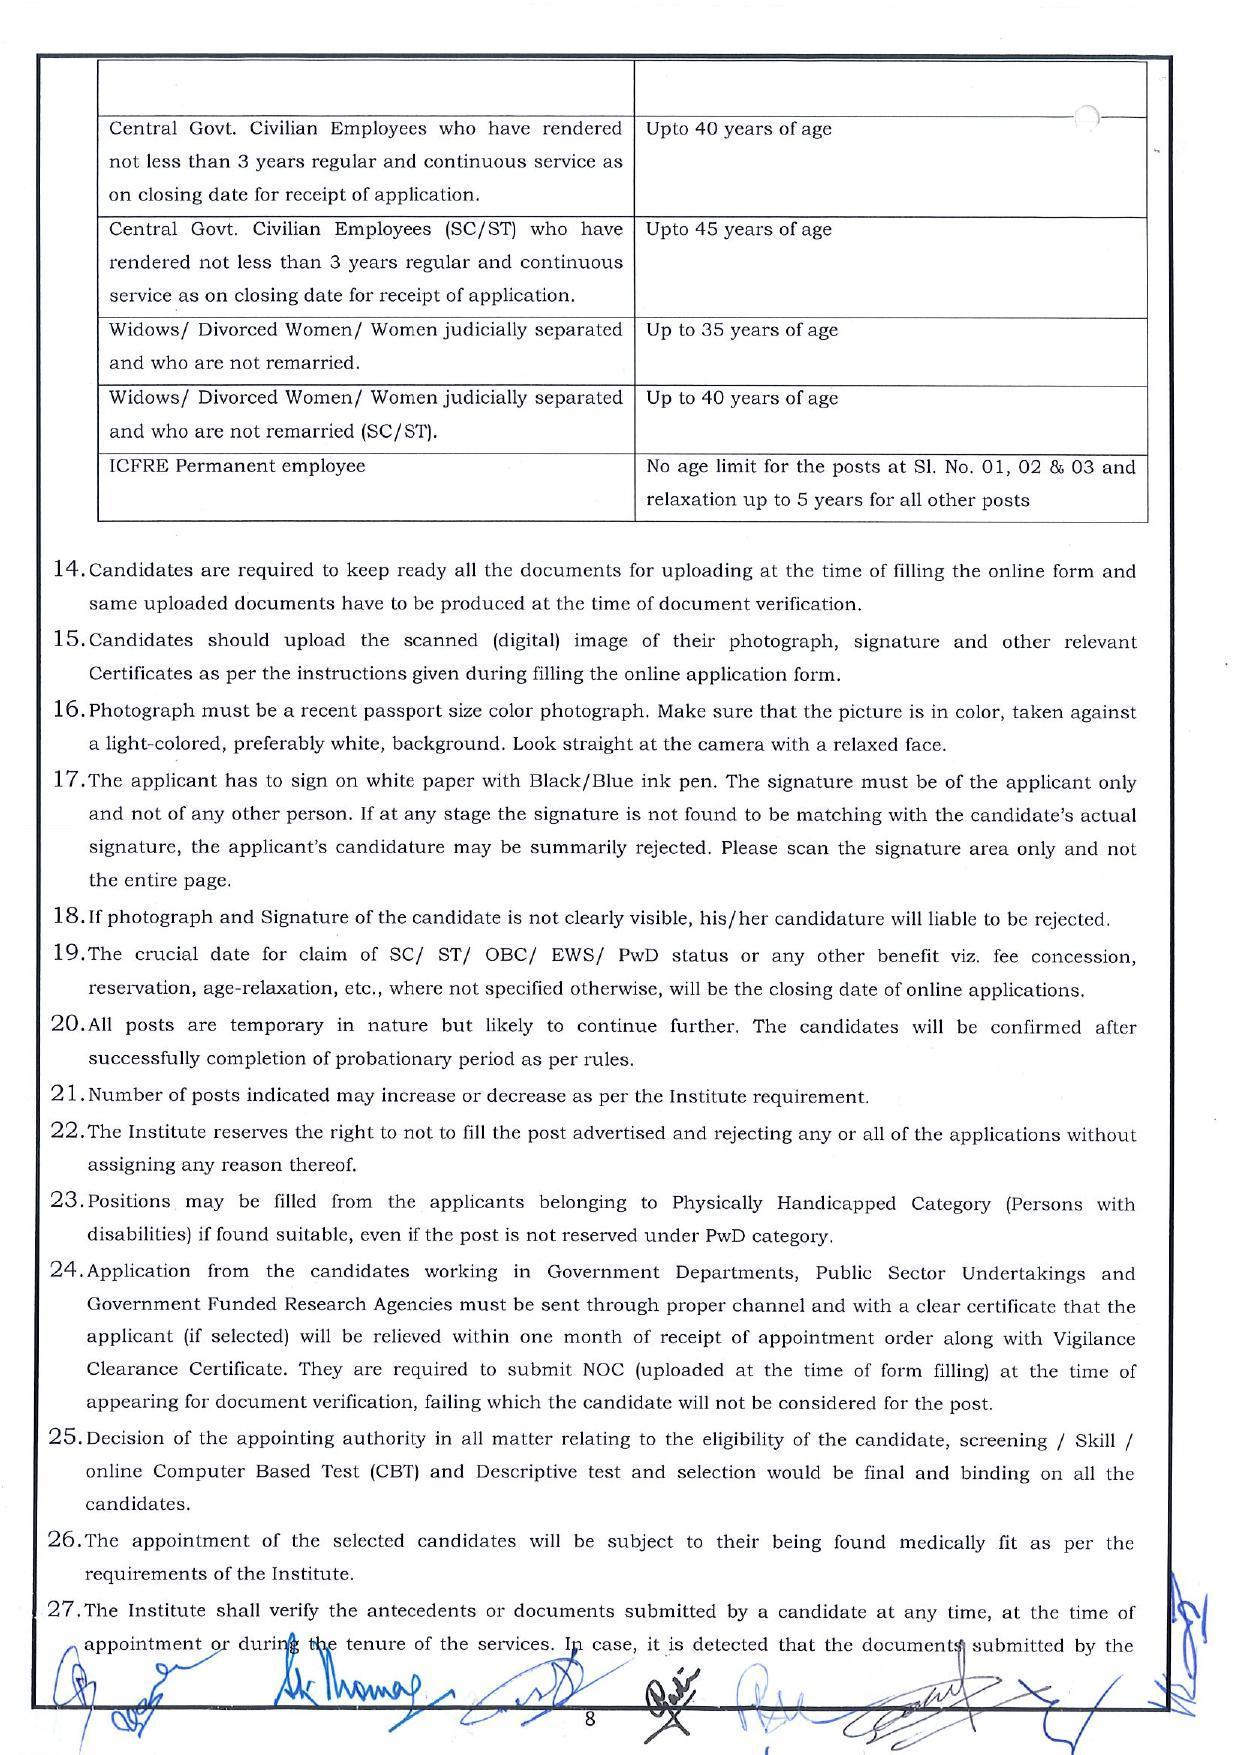 Forest Research Institute Dehradun (FRI Dehradun) Invites Application for 72 MTS, LDC and Various Posts - Page 19